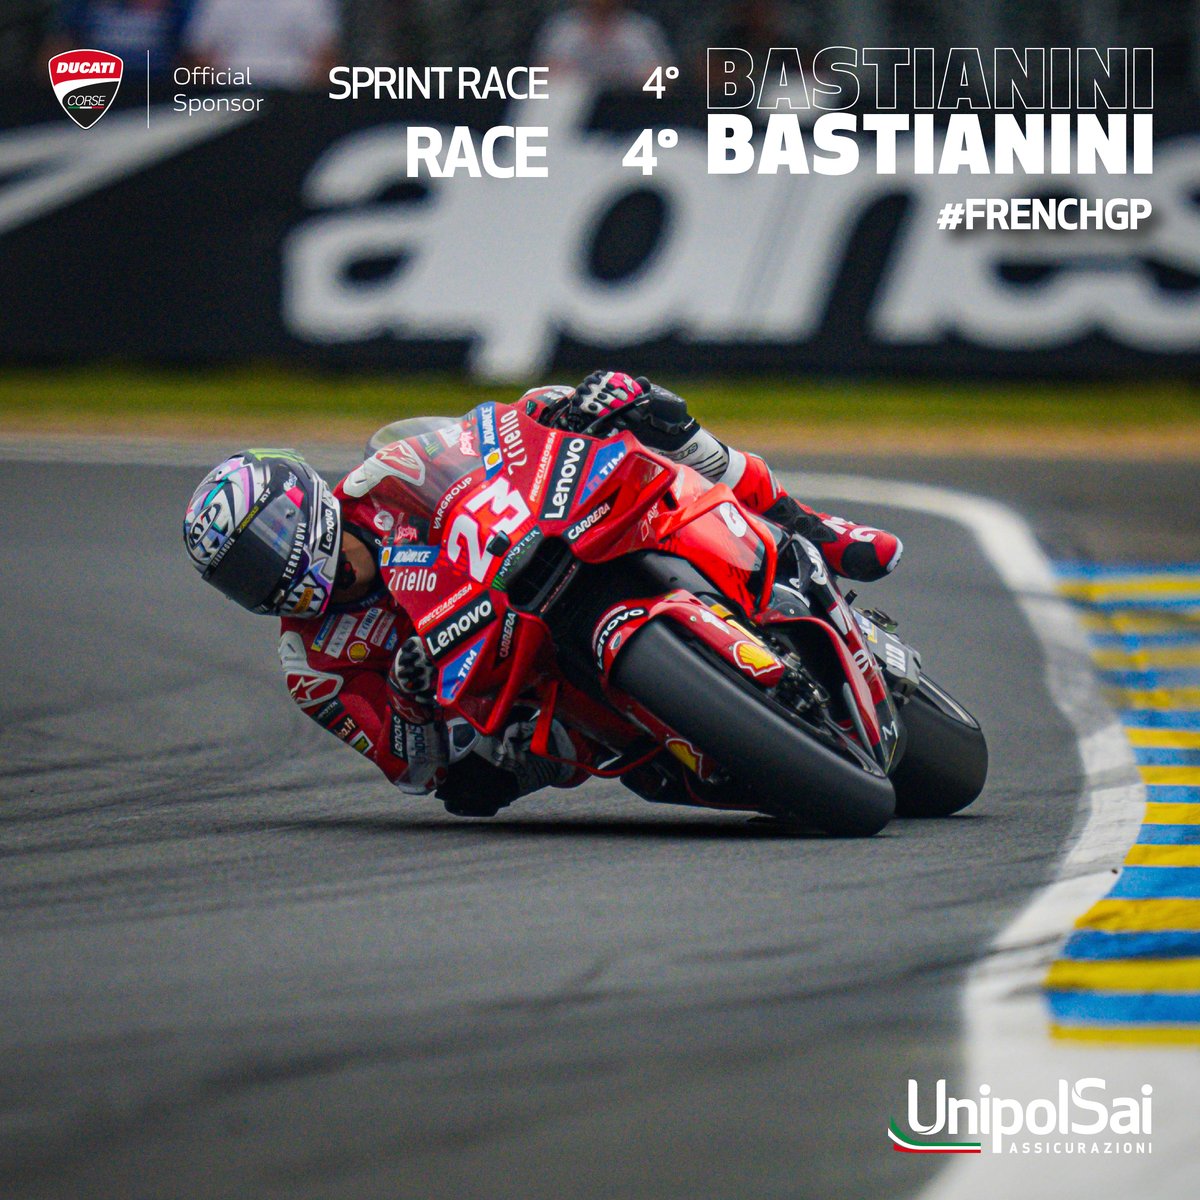 3rd position for @PeccoBagnaia and the Ducati Lenovo Team at Le Mans. 
4th place for resurgent @Bestia23

See you at 👉#CATALANGP

Always #ForzaDucati🔴
#sempreunpassoavanti